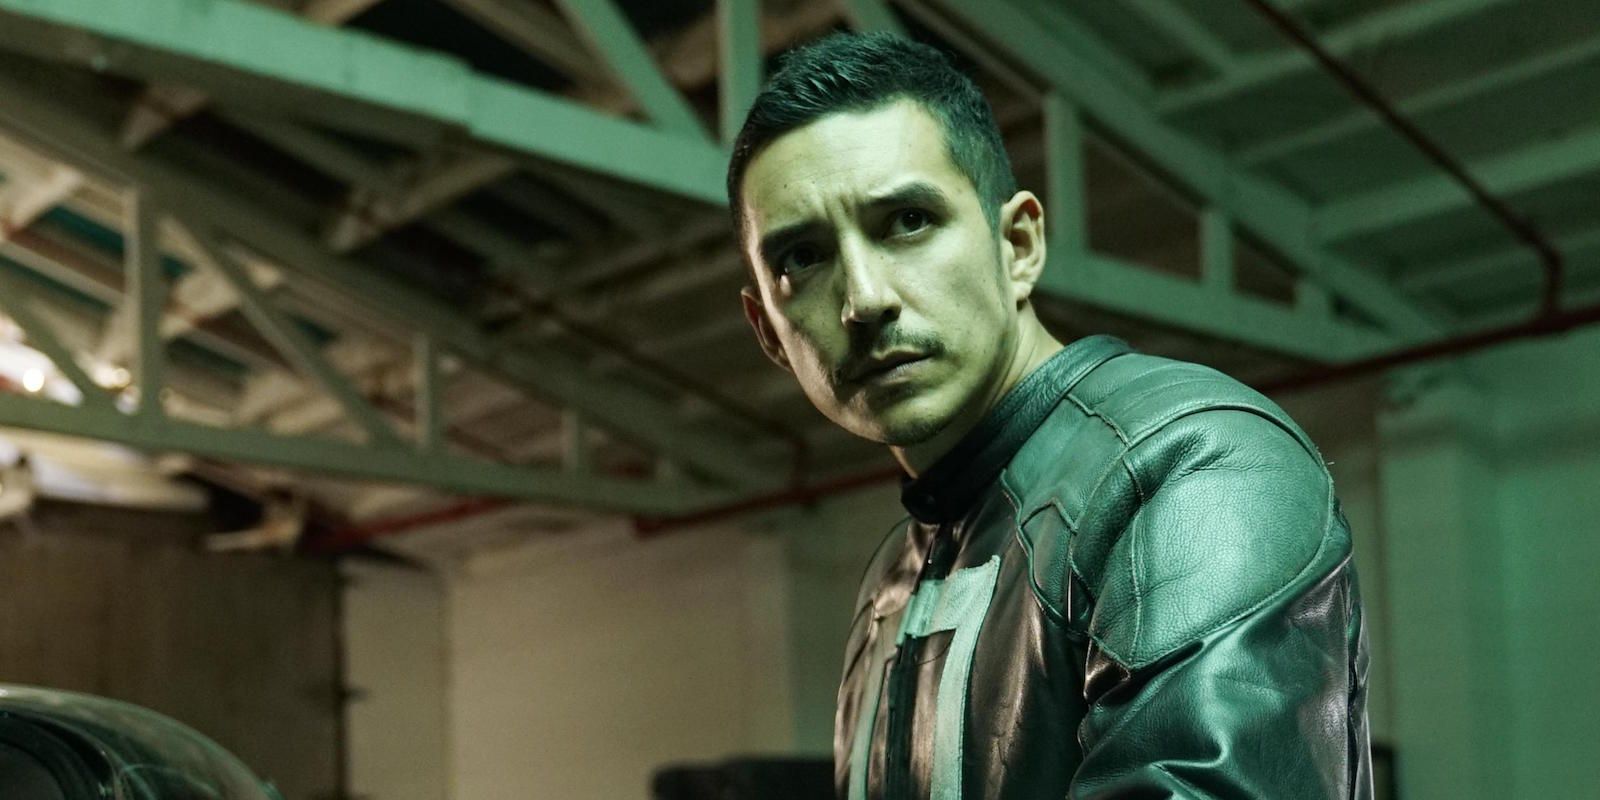 Agents of SHIELD Deals with Our Devils Robbie Reyes